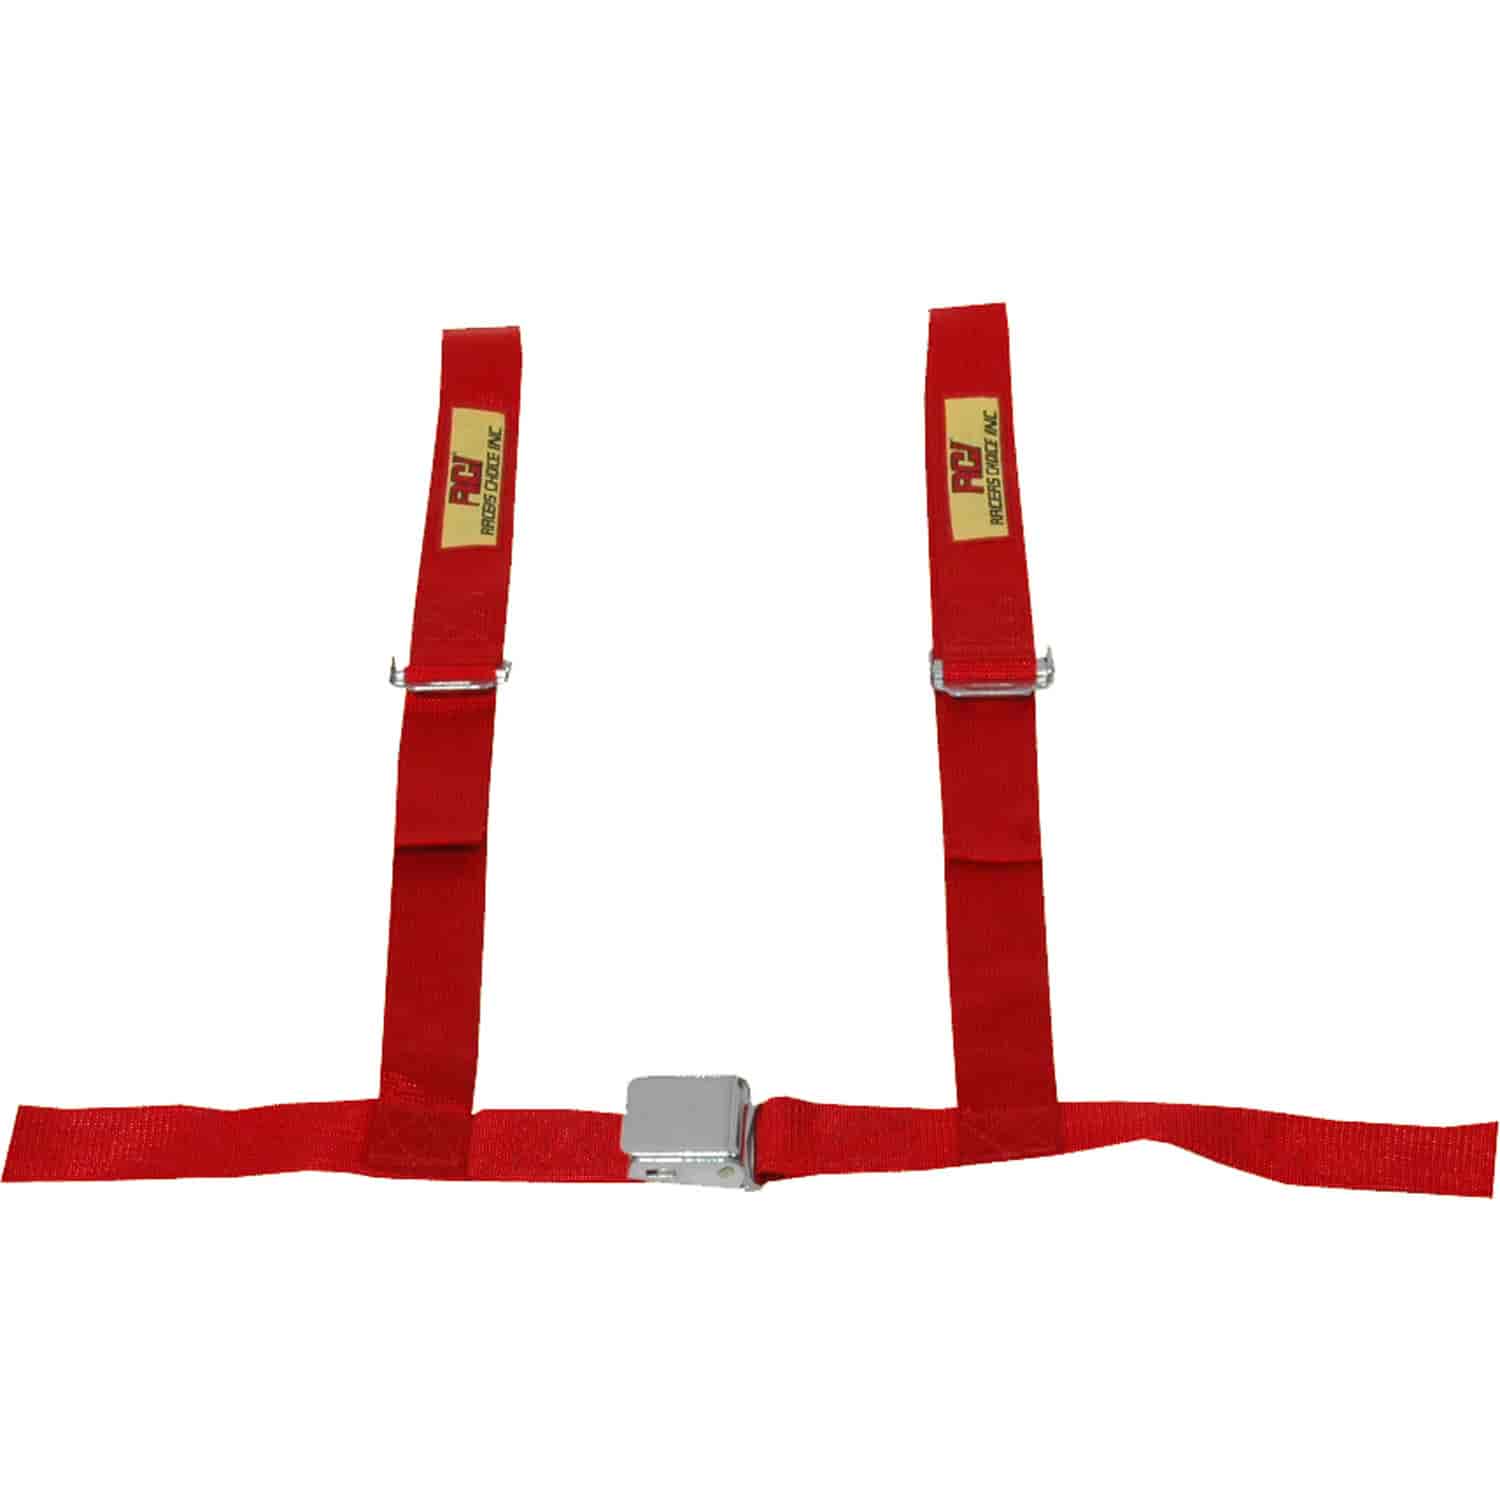 Non-SFI 4-Point Racing Harness Red